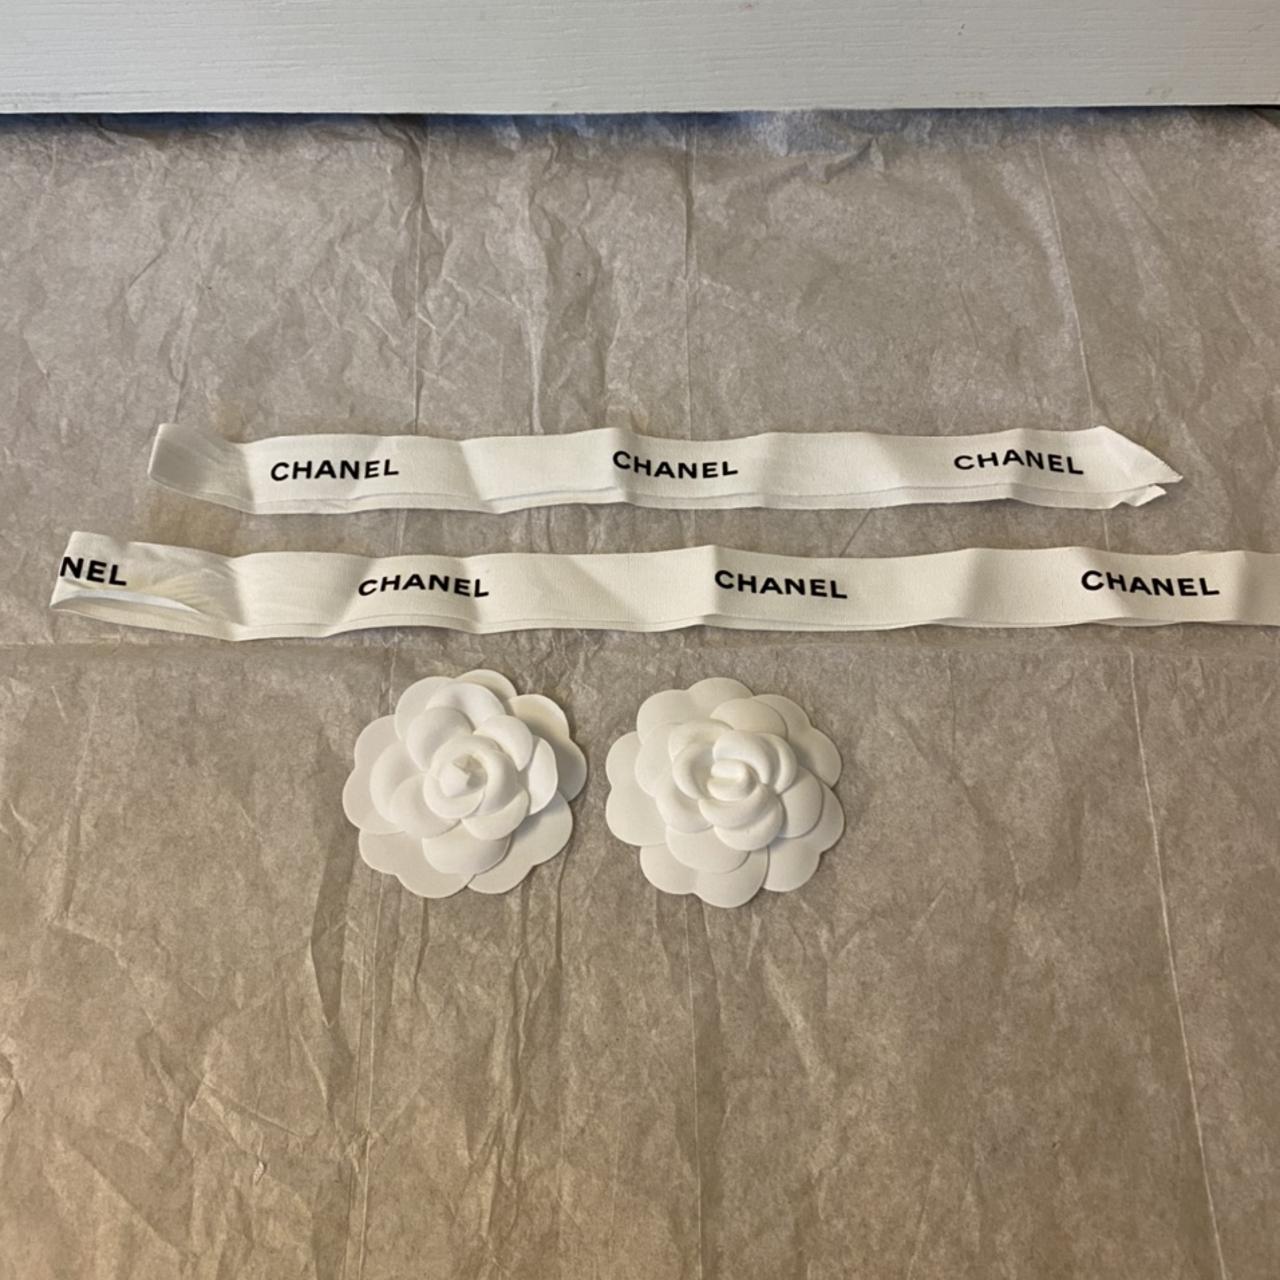 2 Chanel flowers and 2 ribbons, can fit small box. - Depop